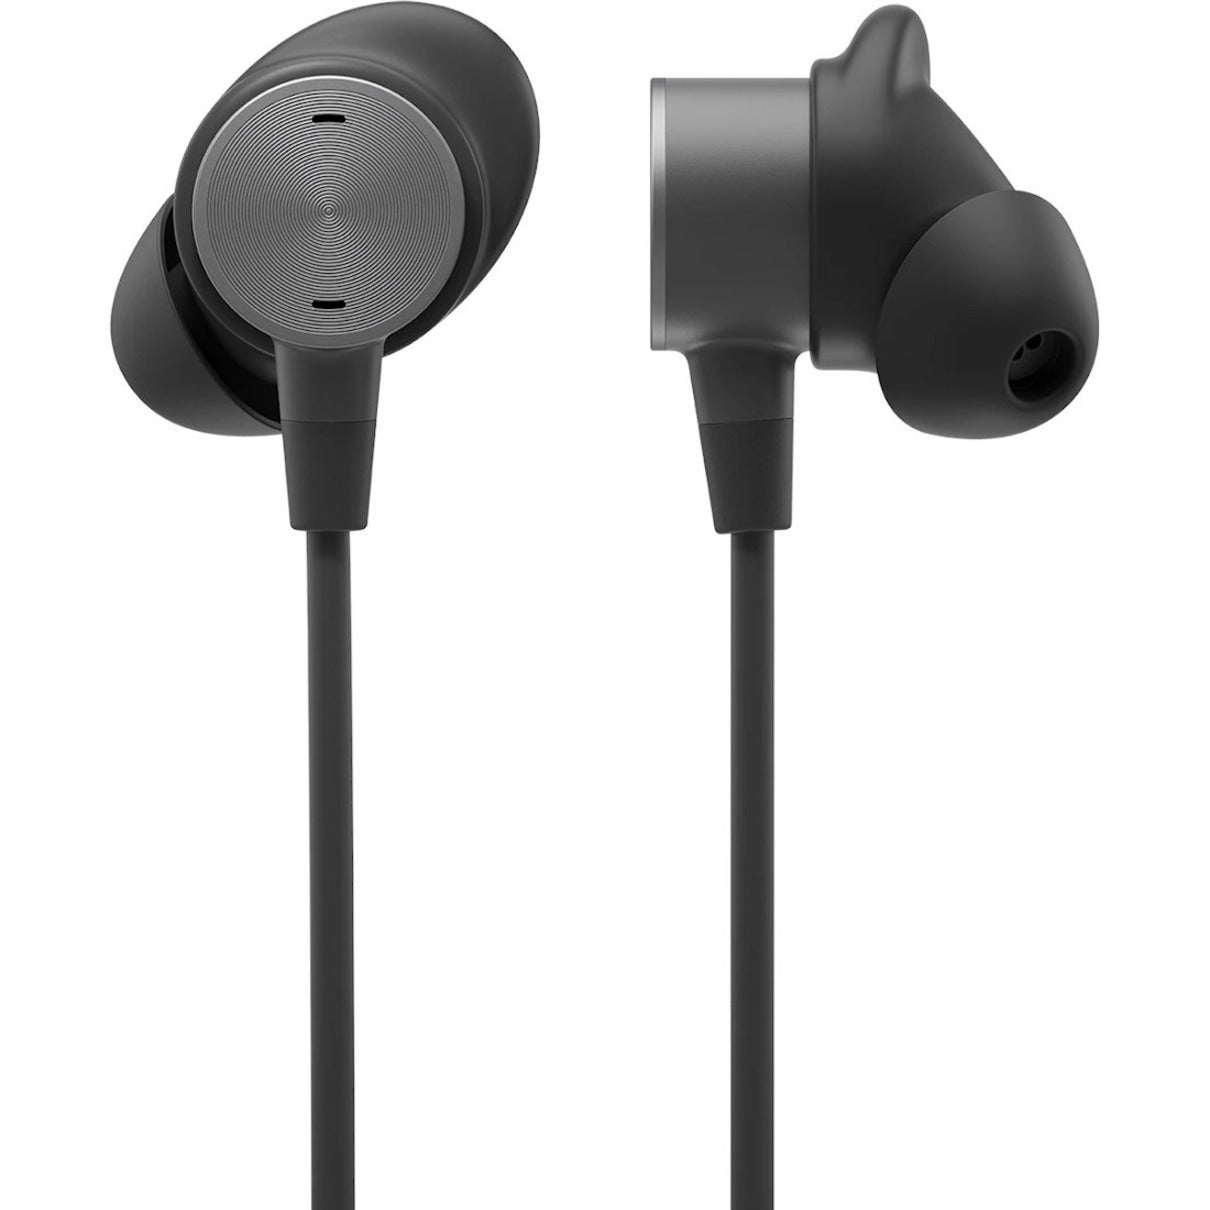 Logitech 981-001008 Zone Wired Earbuds Teams, Noise Cancelling, Omni-directional Microphone, 2 Year Warranty